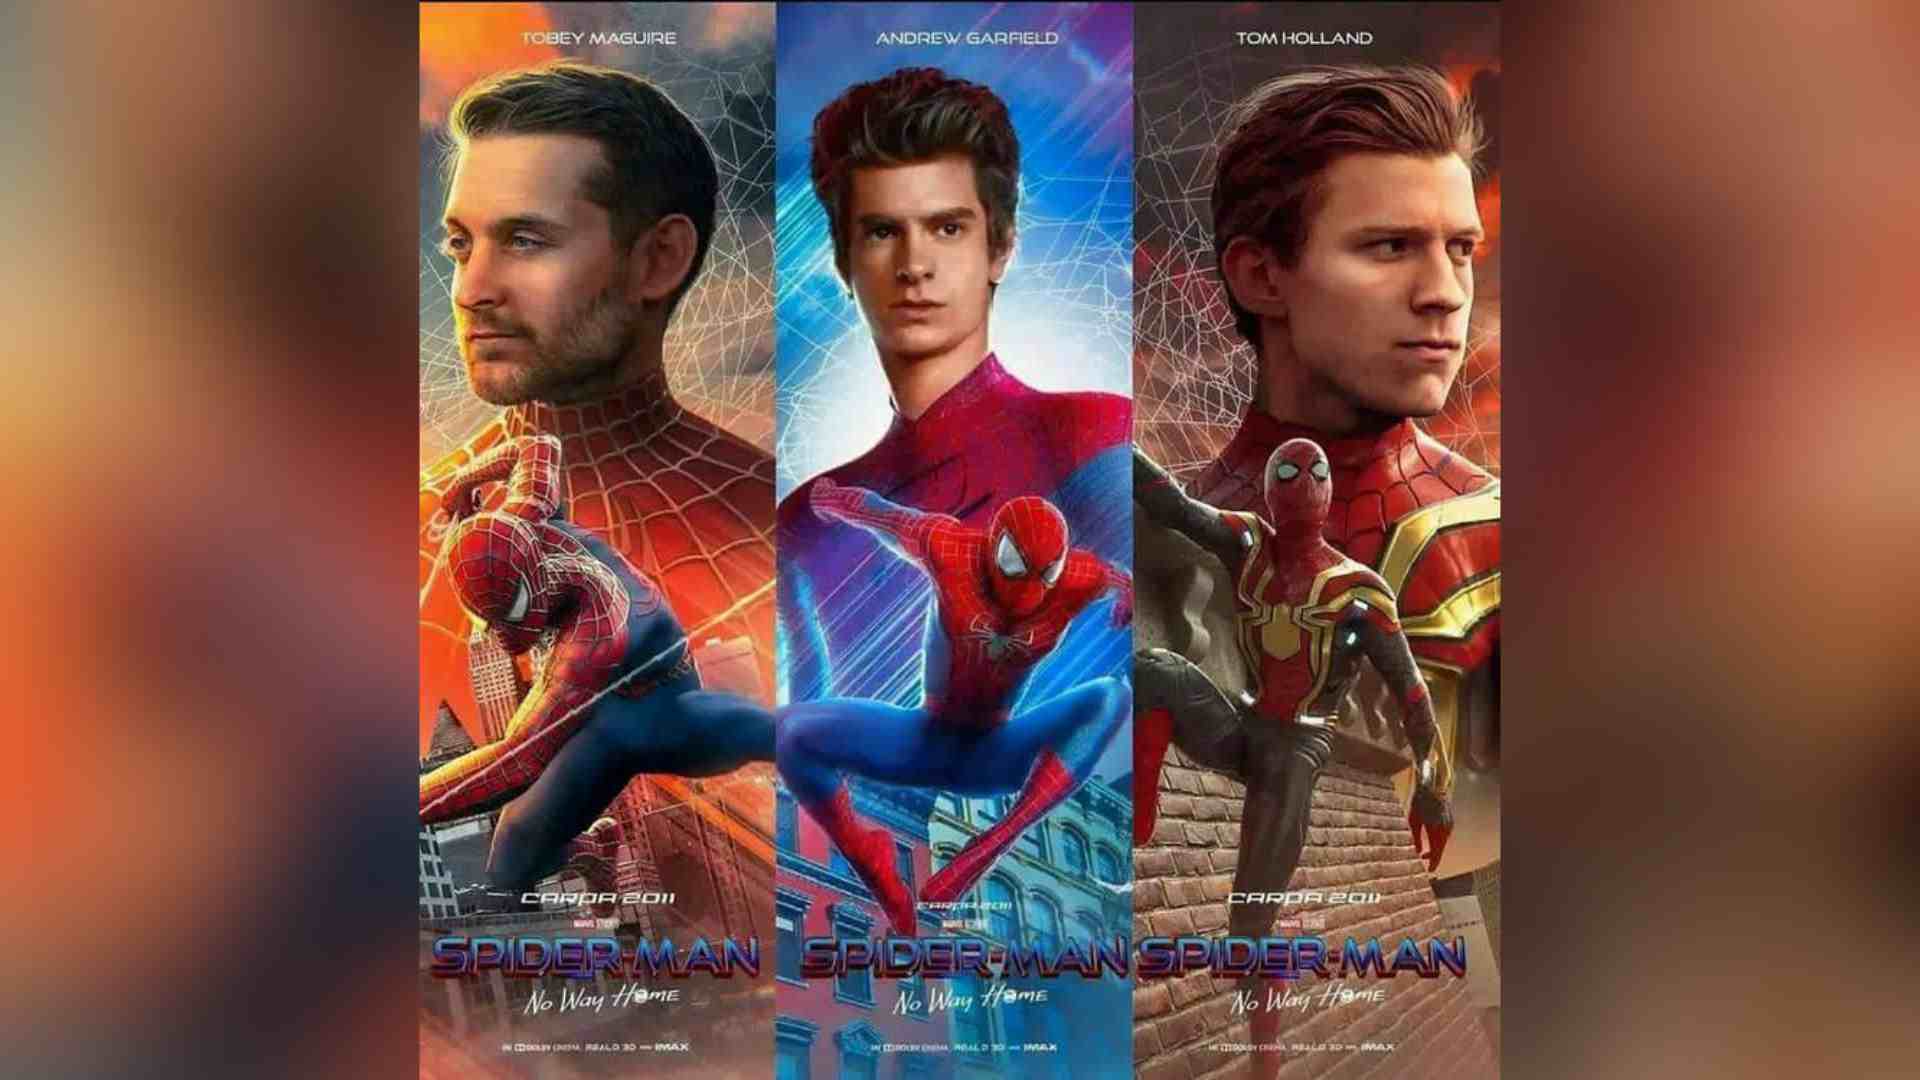 Spider-Man actors Andrew Garfield,Tom Holland and Tobey Maguire